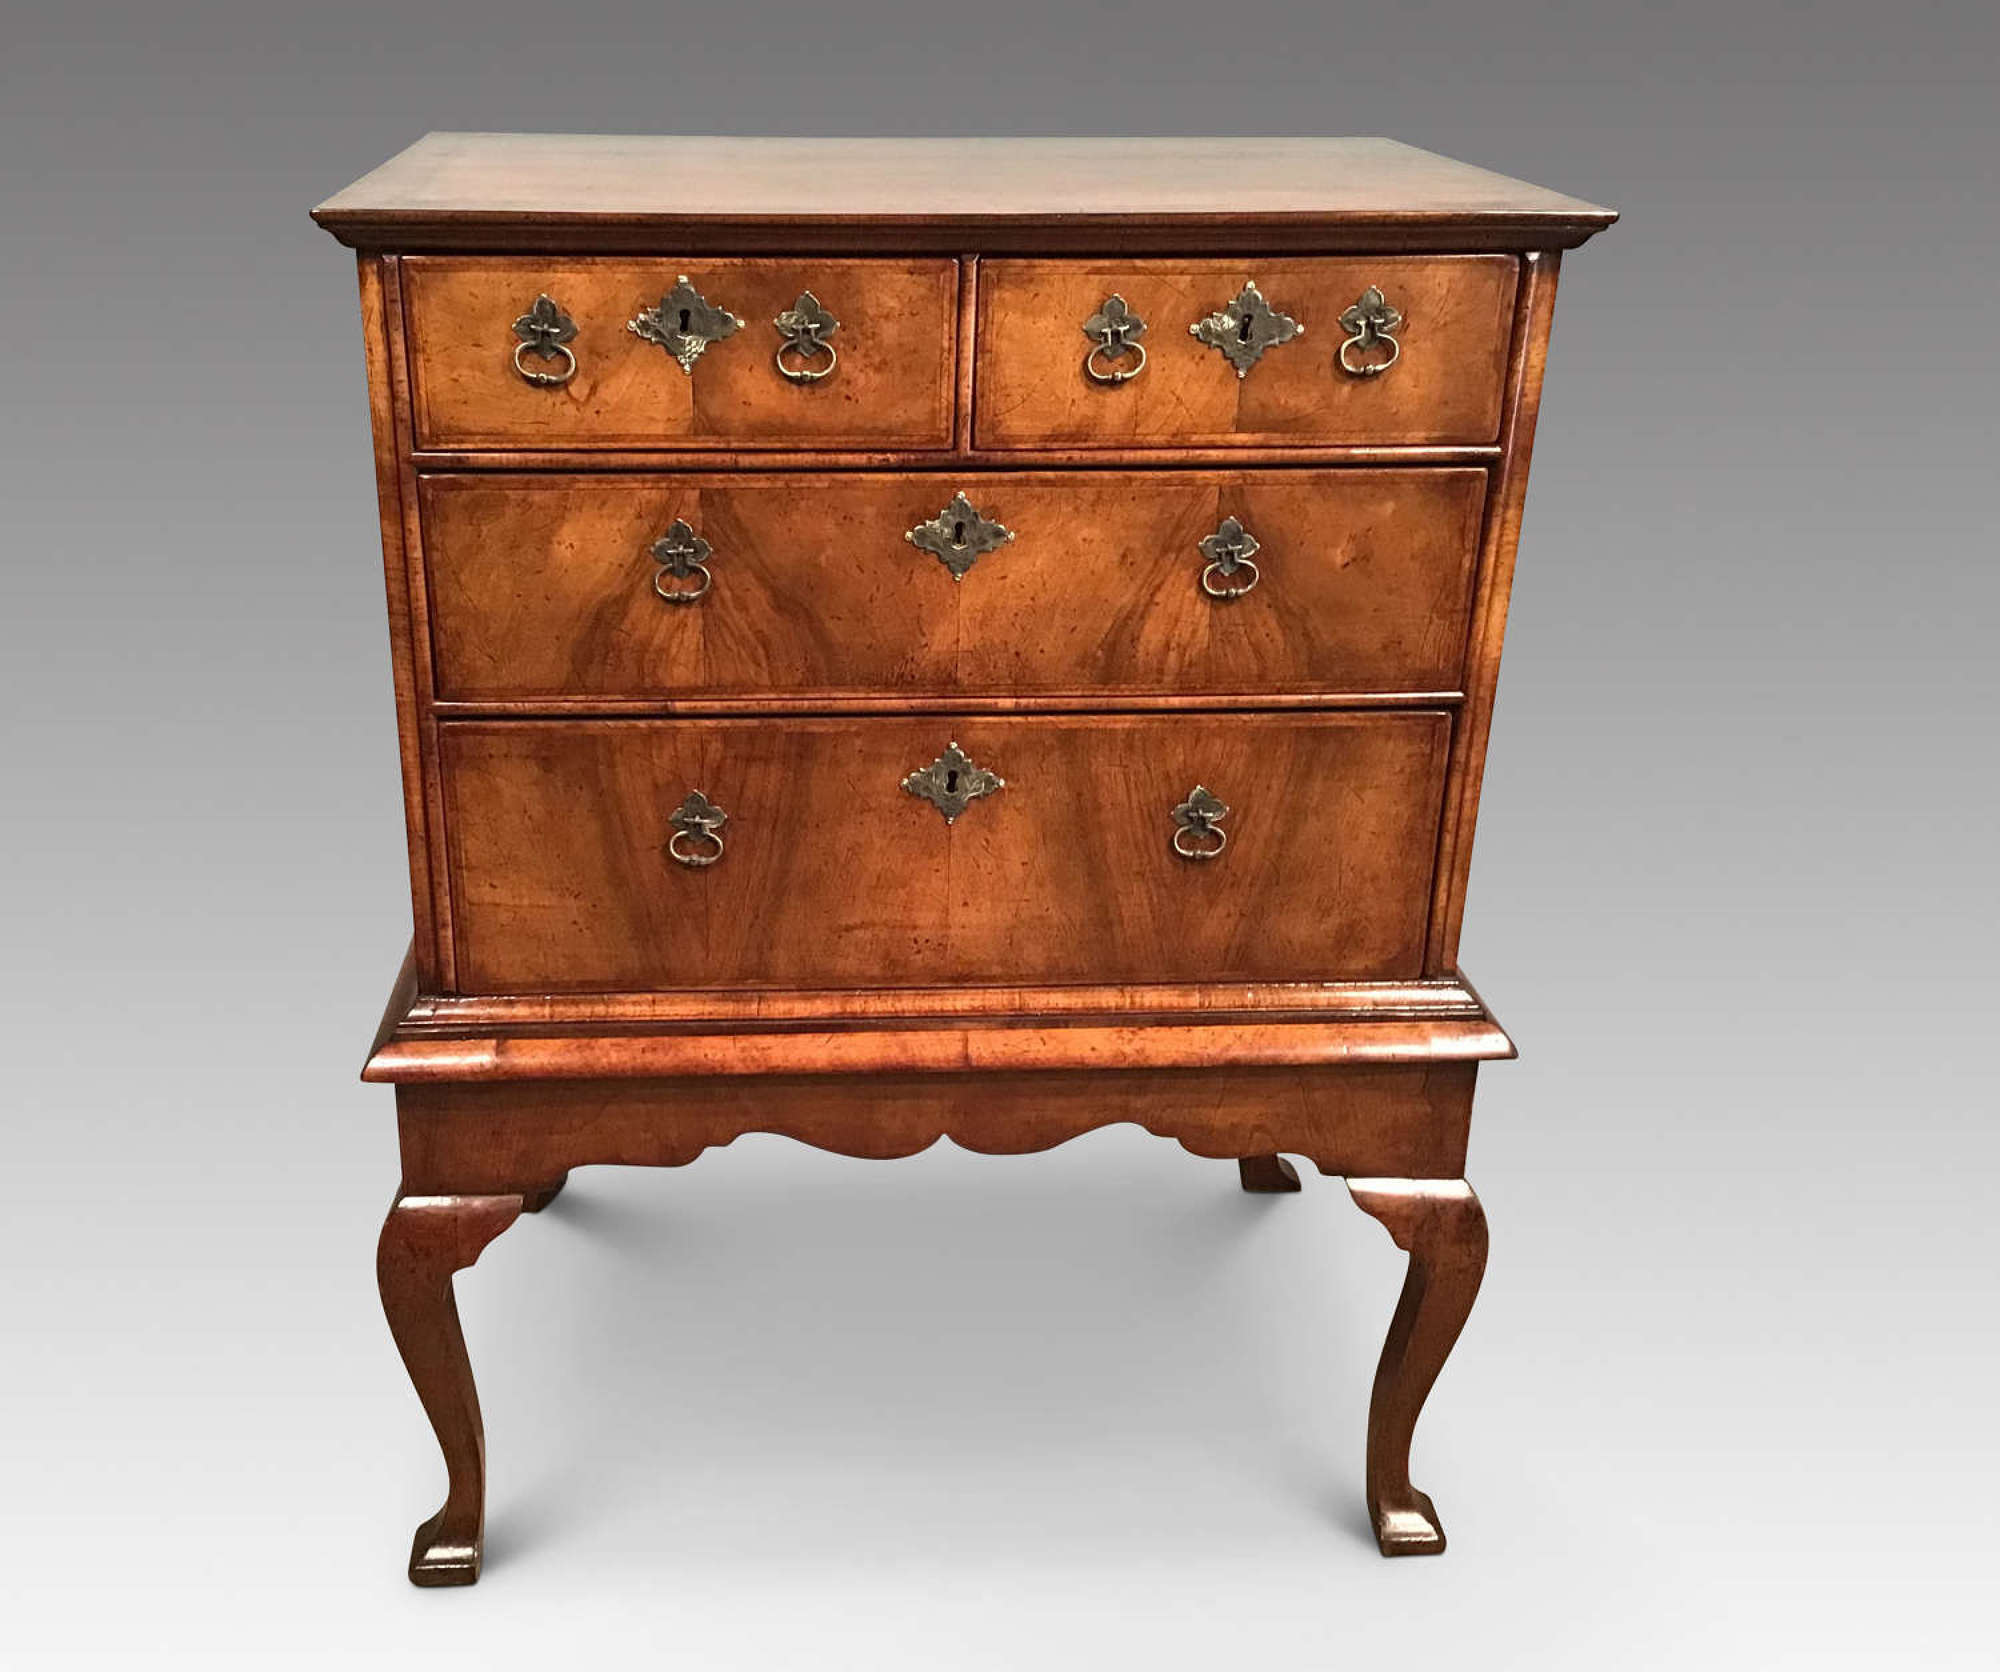 Early 18th century walnut  chest on stand.